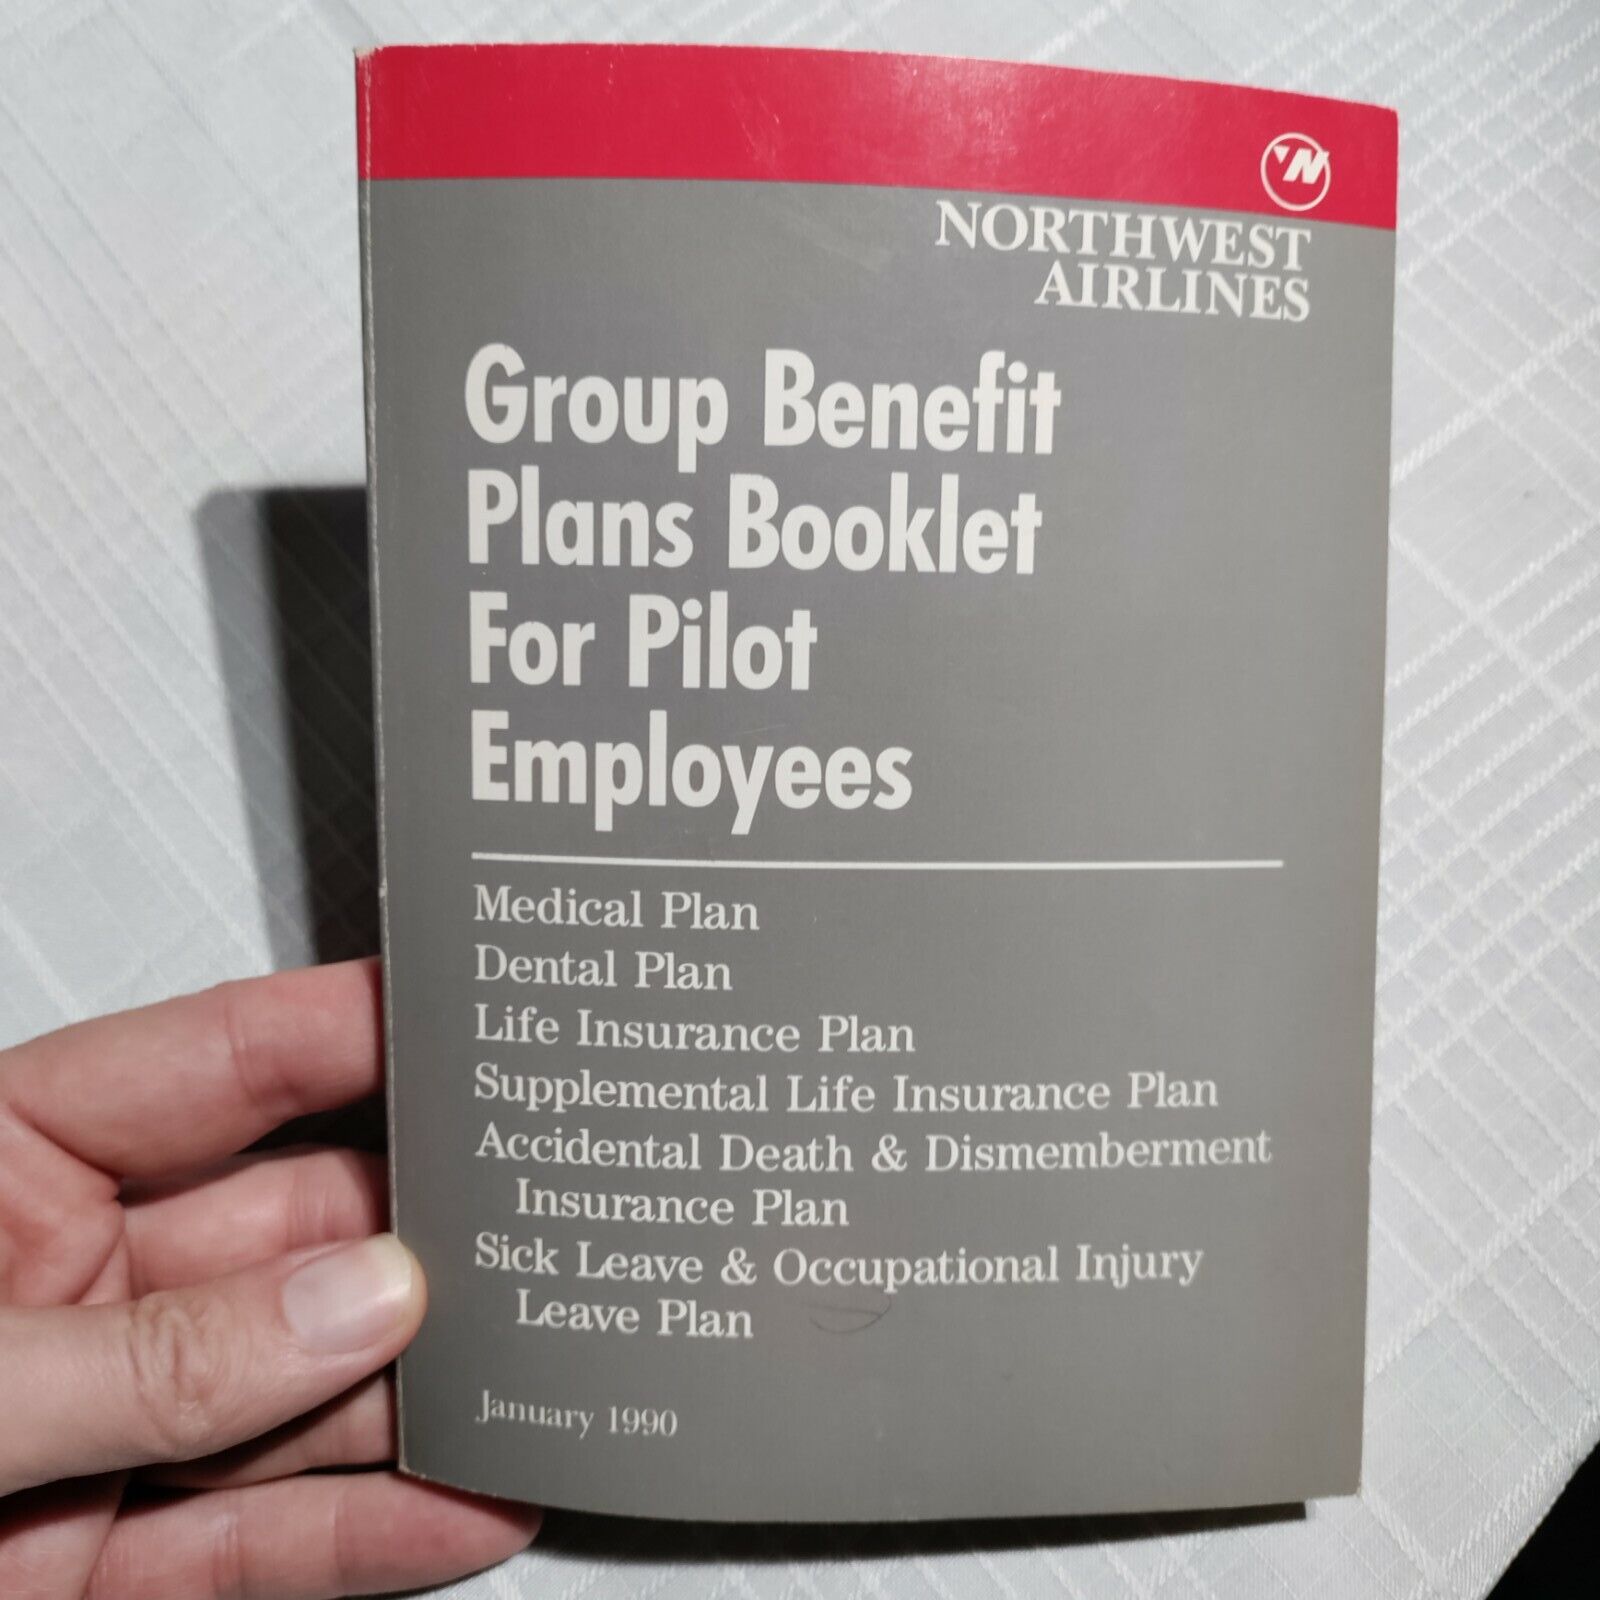 RARE NORTHWEST AIRLINES Group Benefit Plan Booklet 1990